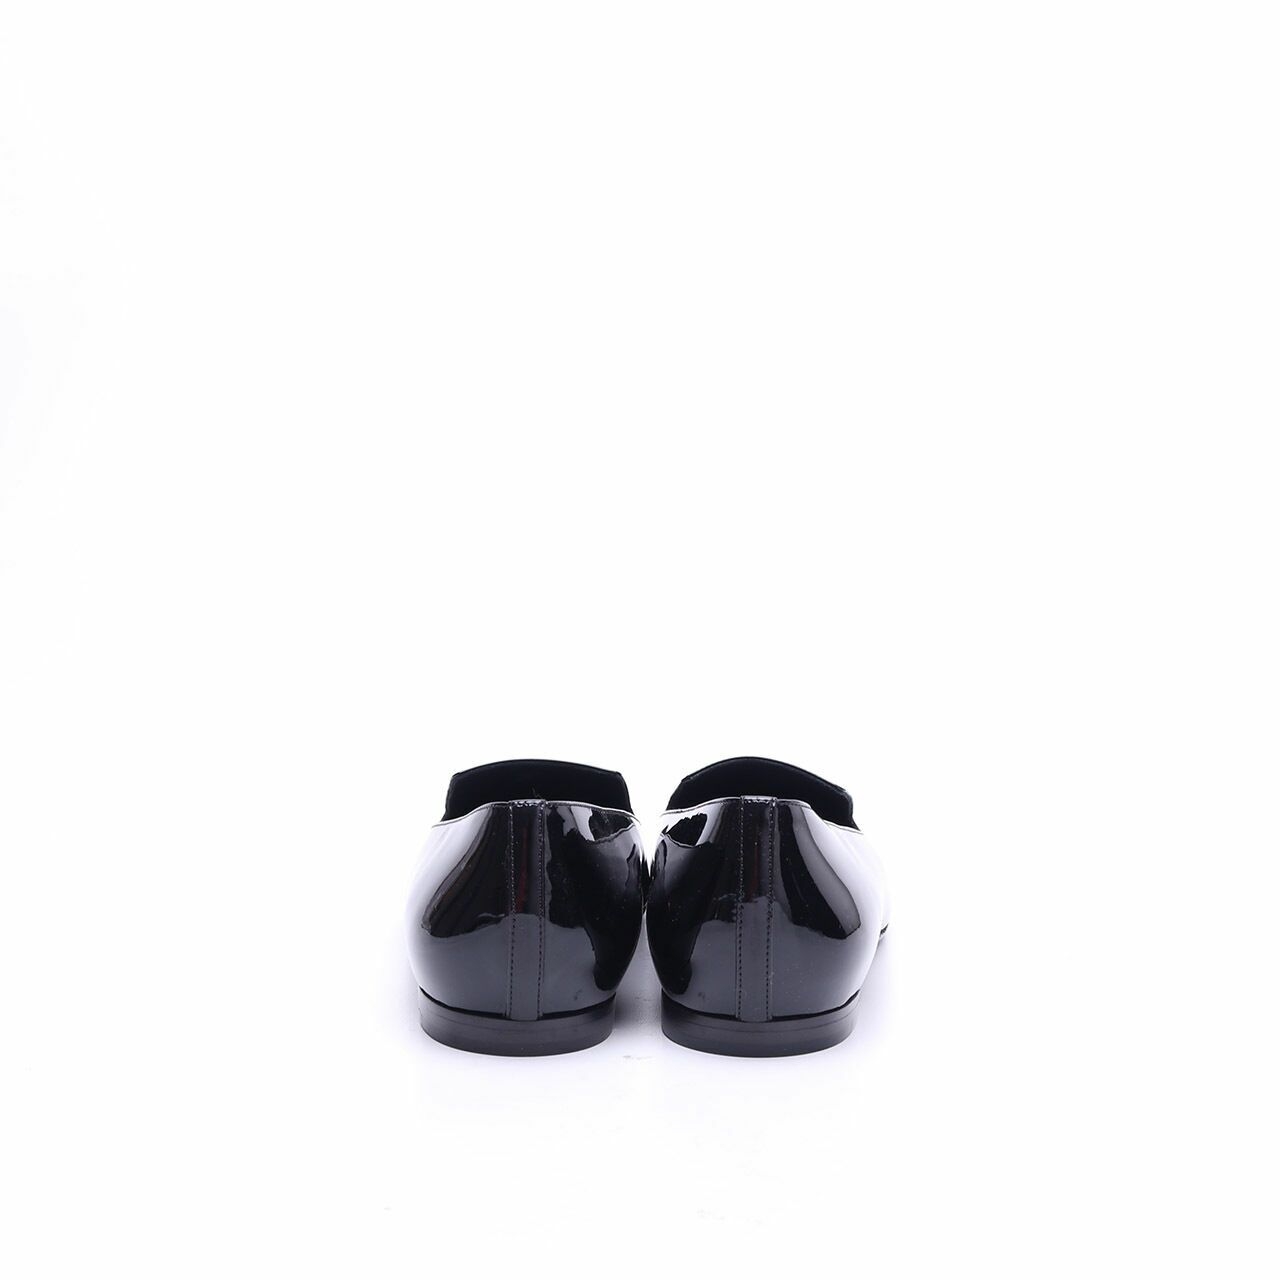 Chanel Moccasin Black Patent Leather Loafers